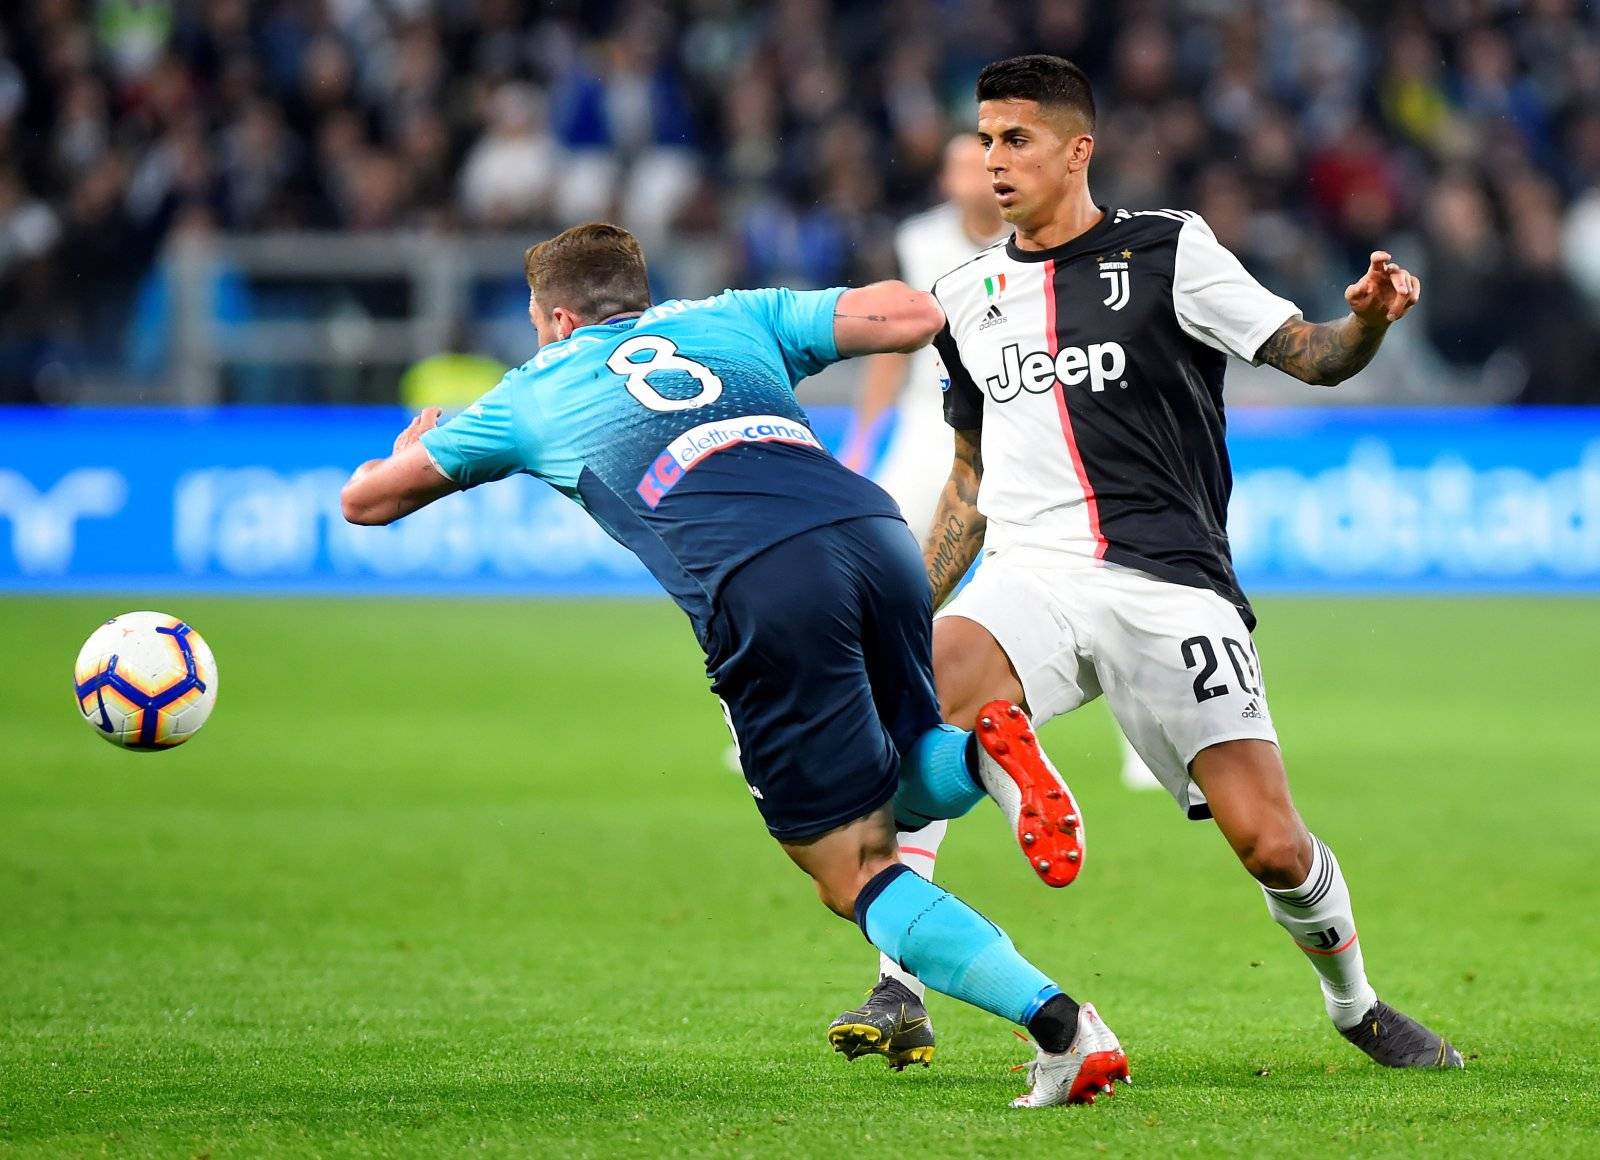 Manchester City: Joao Cancelo's possible arrival depends on Danilo's future - Manchester City